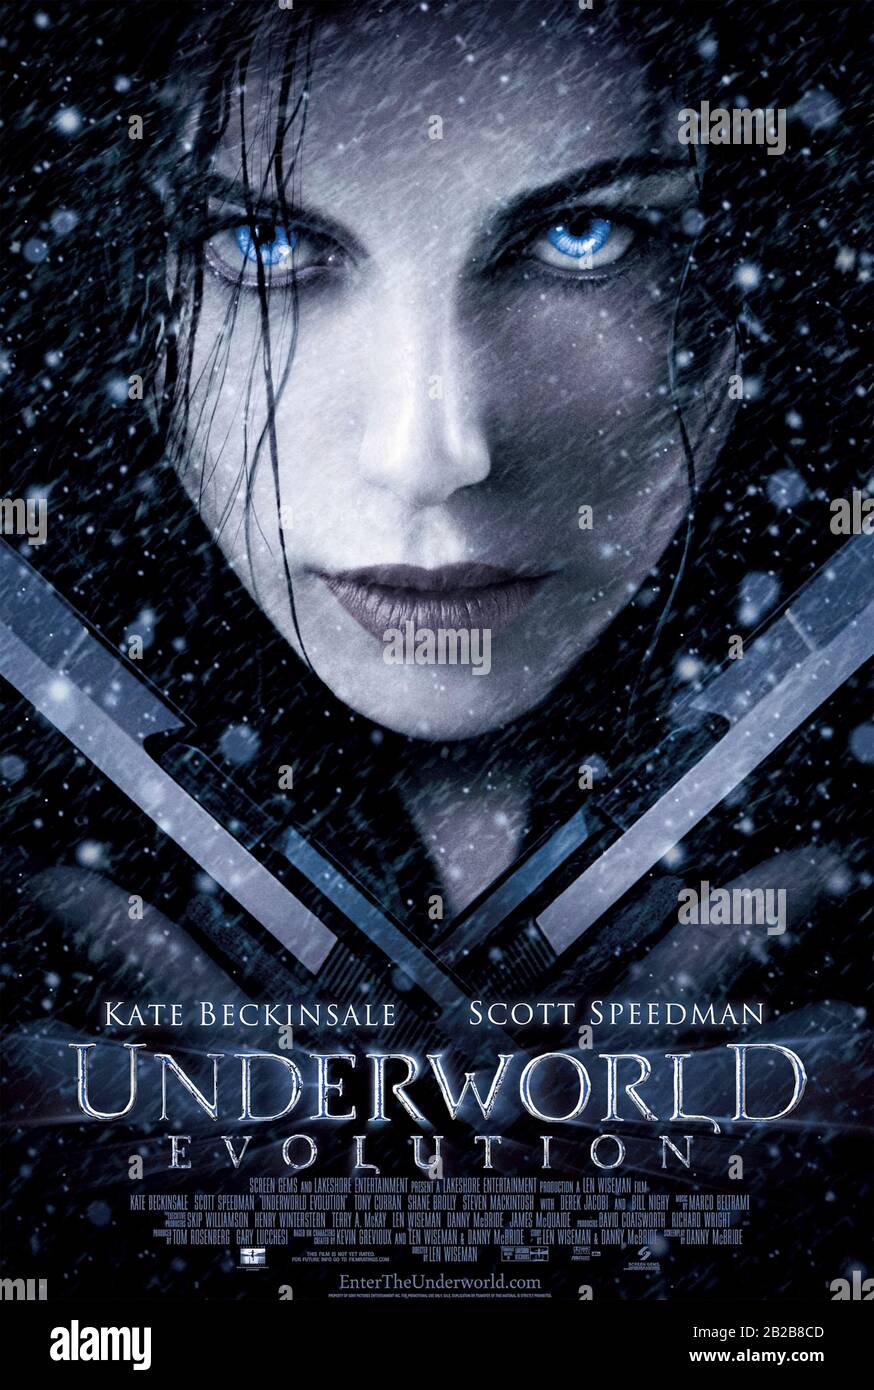 Underworld: Evolution (2006) directed by Len Wiseman and starring Kate Beckinsale, Scott Speedman, Bill Nighy and Steven Mackintosh. Selene the vampire joins forces with a werewolf hybrid to unlock the secrets of their bloodlines and the eternal war between vampires and werewolves. Stock Photo